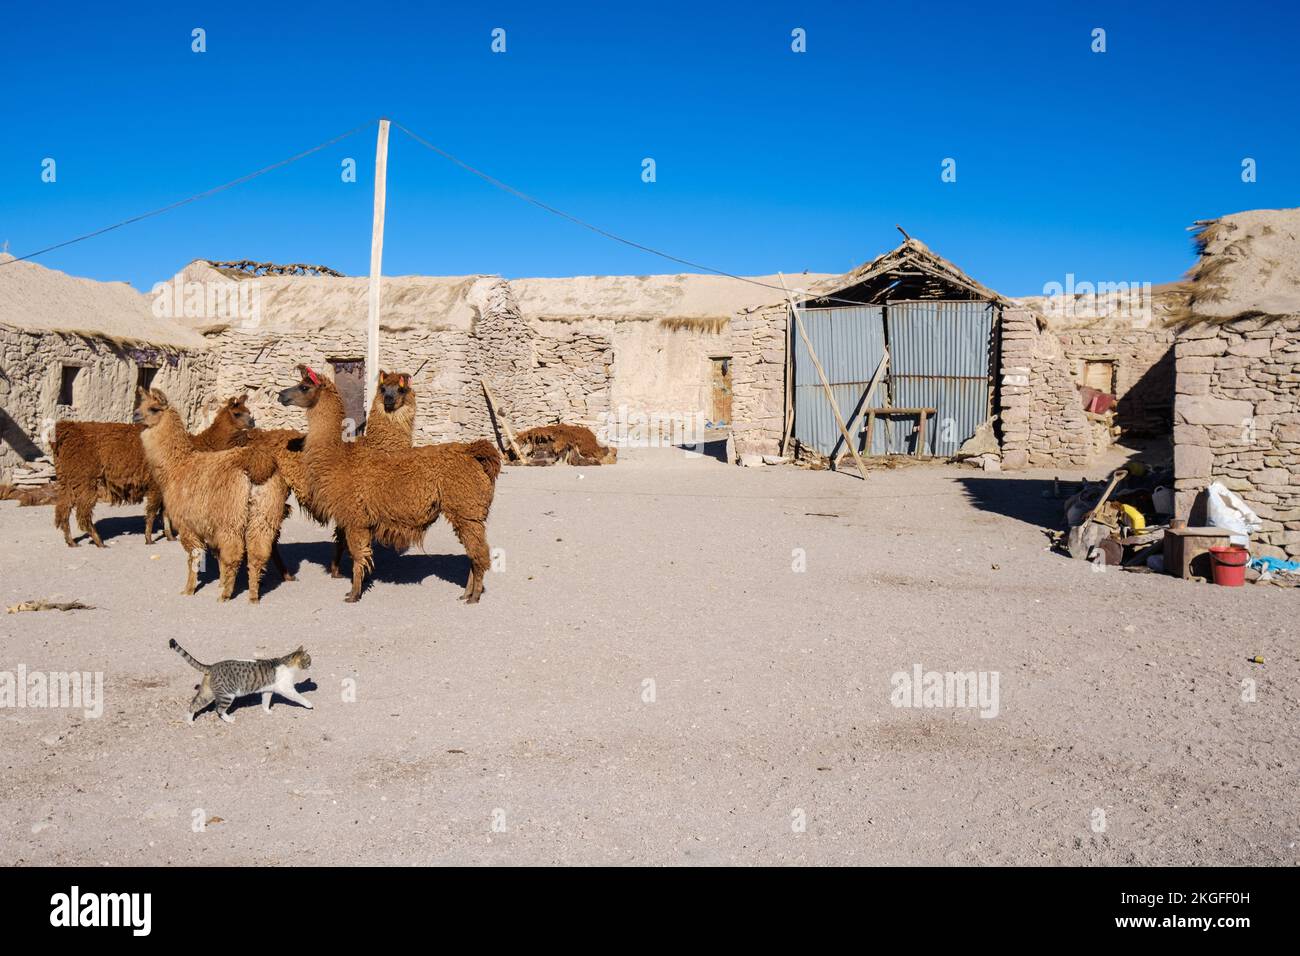 Llamas roaming free on the village of Quetena Grande in the Altiplano (High Plains), Sur Lípez Province, Bolivia Stock Photo